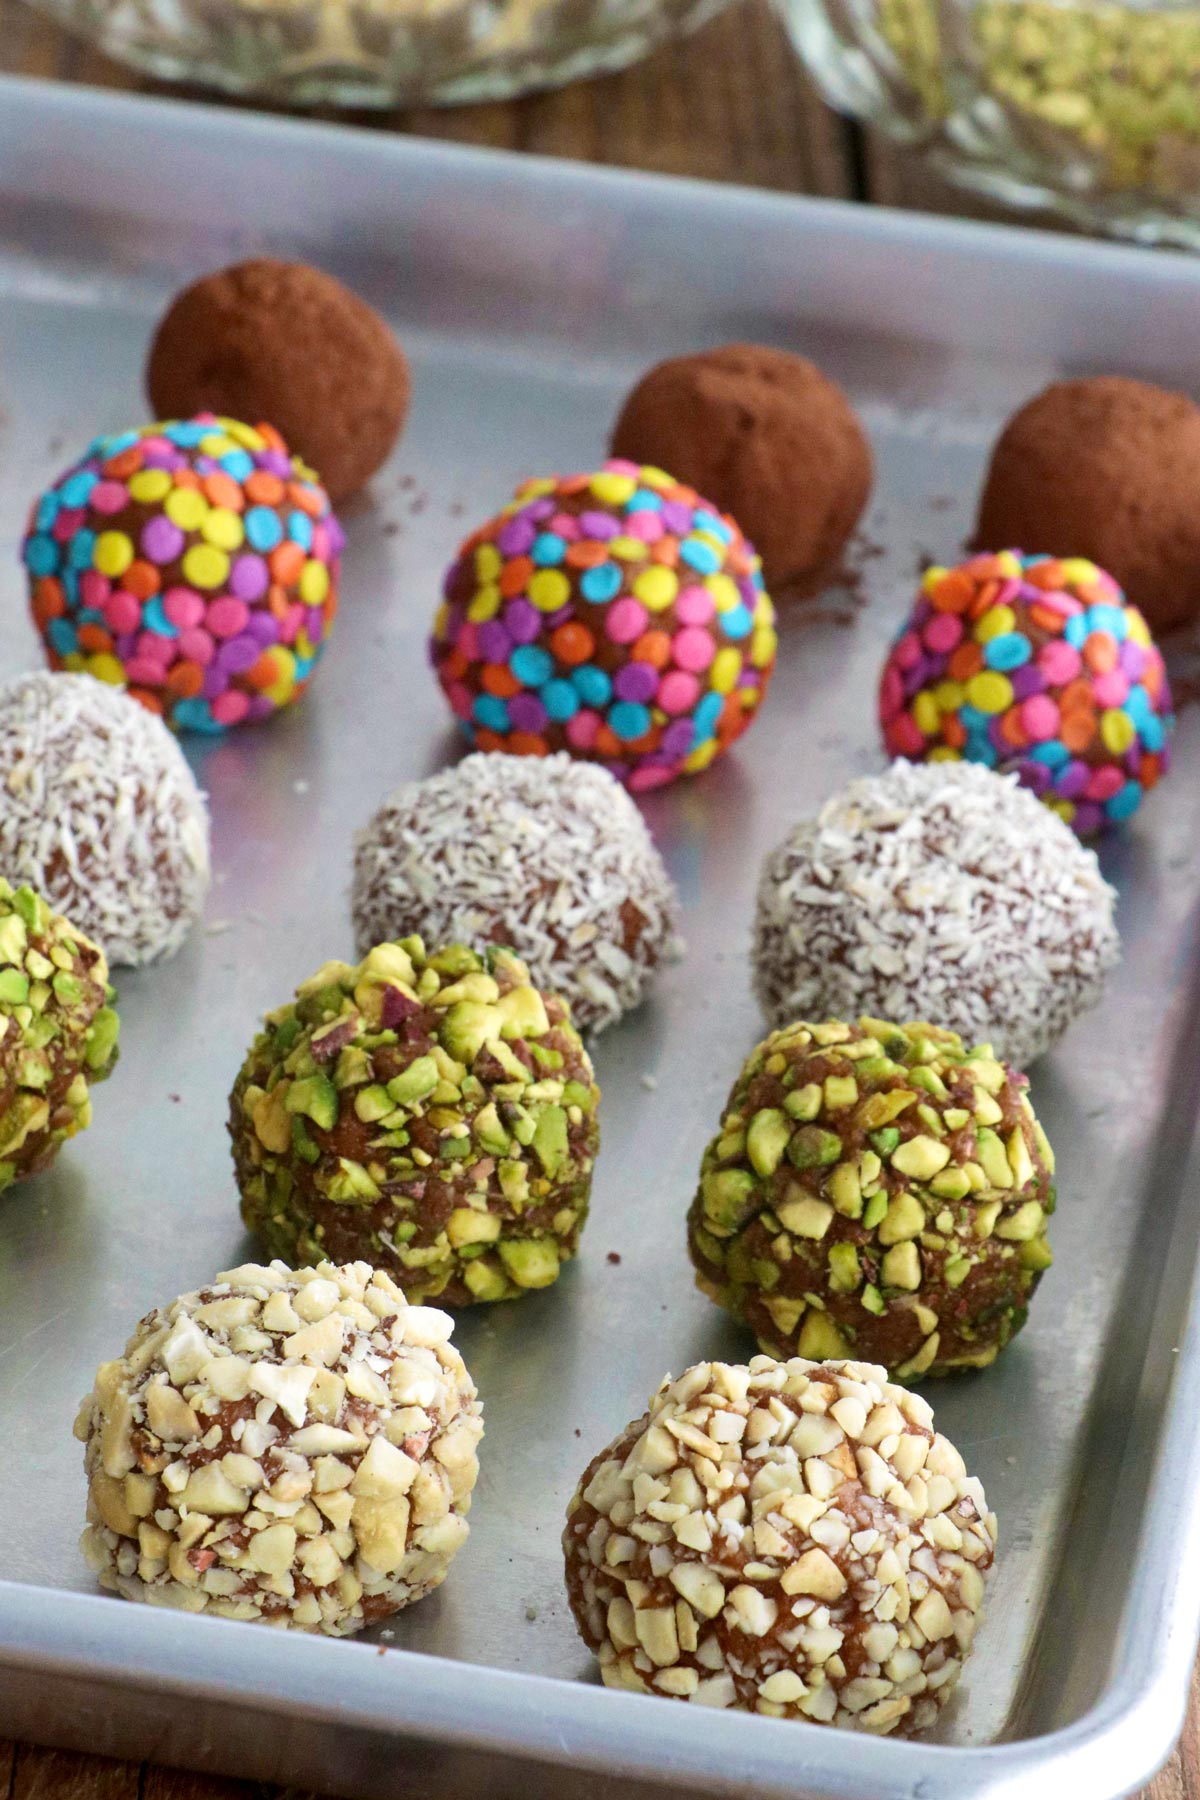 Graham balls on a baking sheet with ground cashew, ground pistachio, desiccated coconut, candy sprinkles, and cocoa powder coatings.